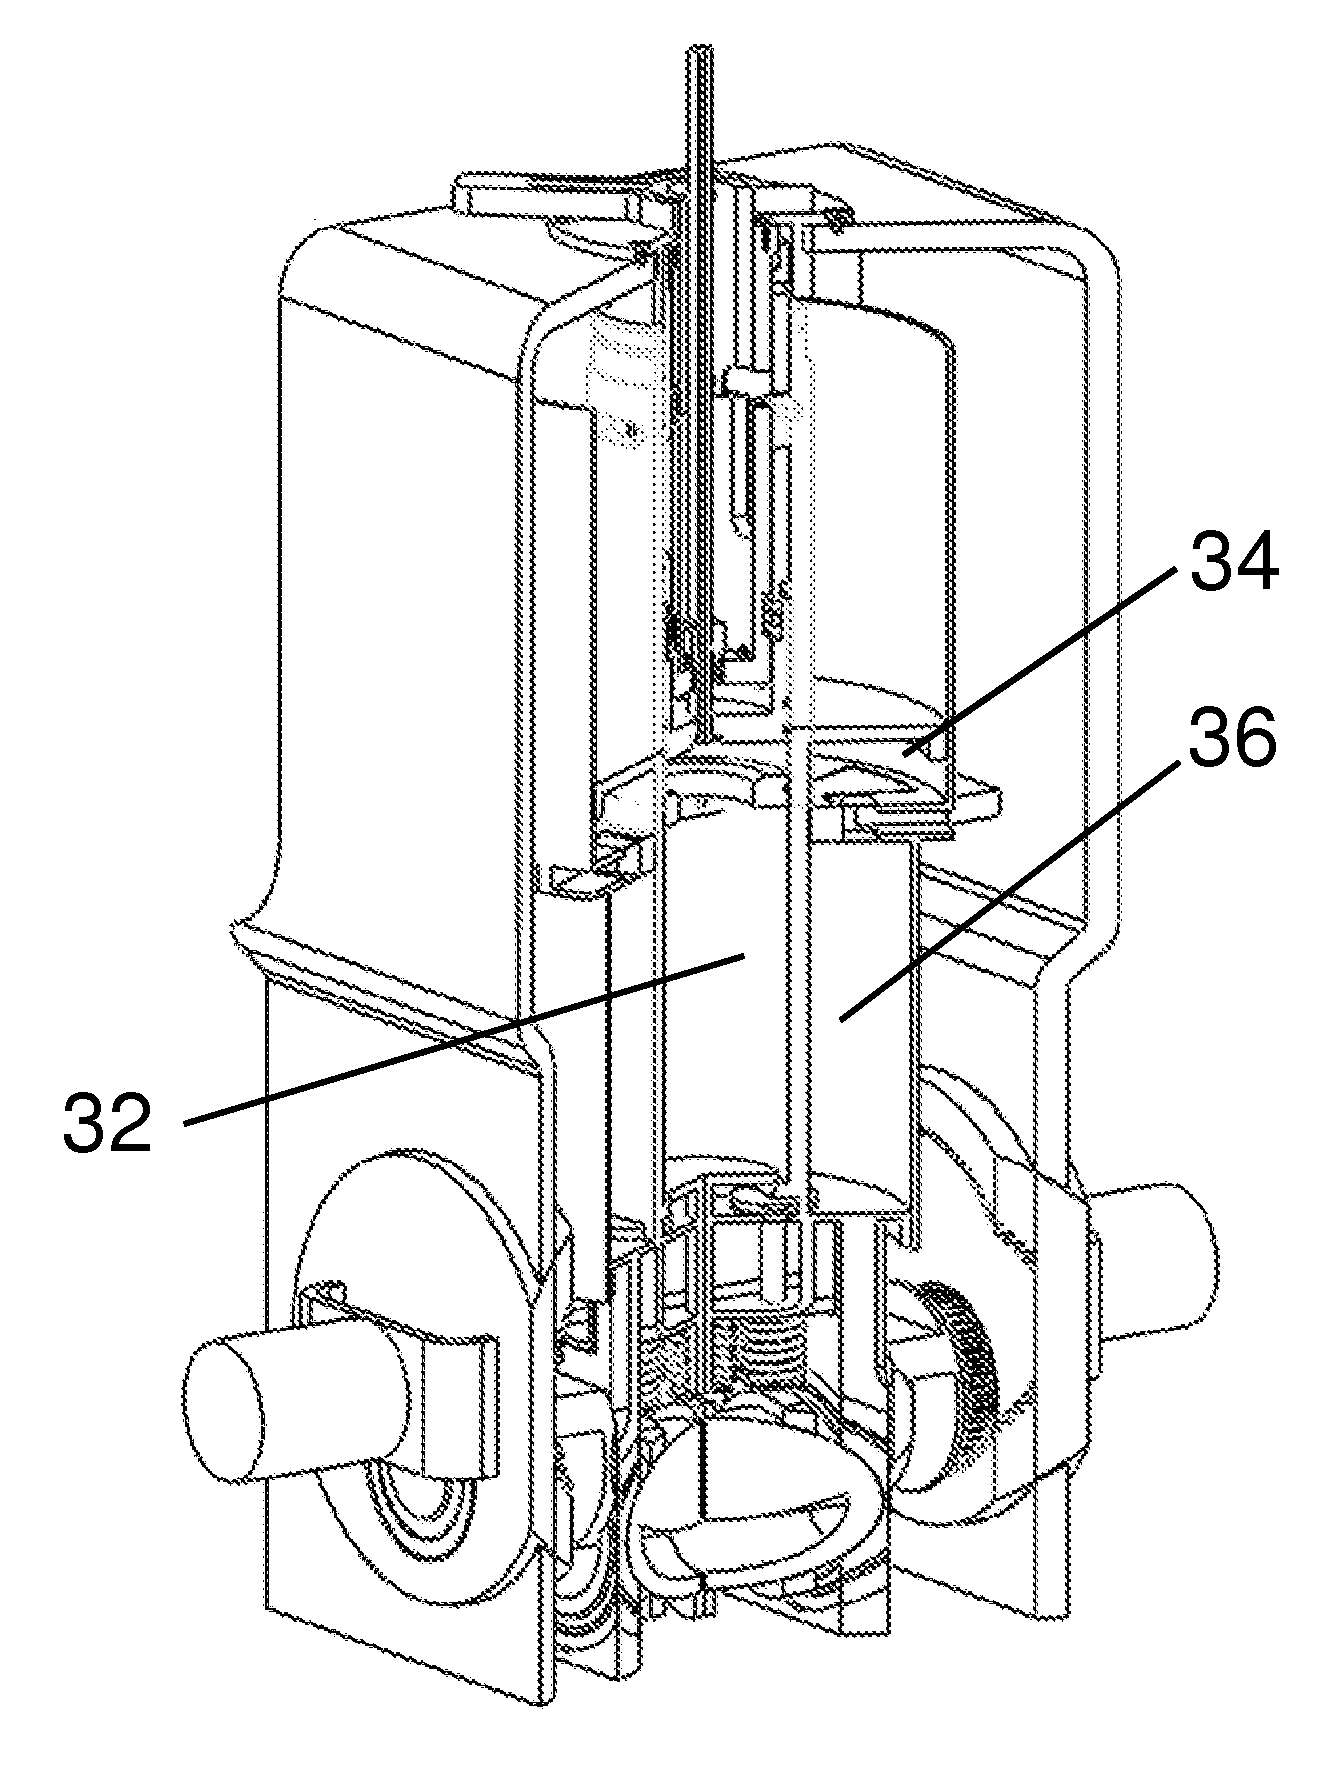 Two-Stroke Internal Combustion Engine with Three Chambers